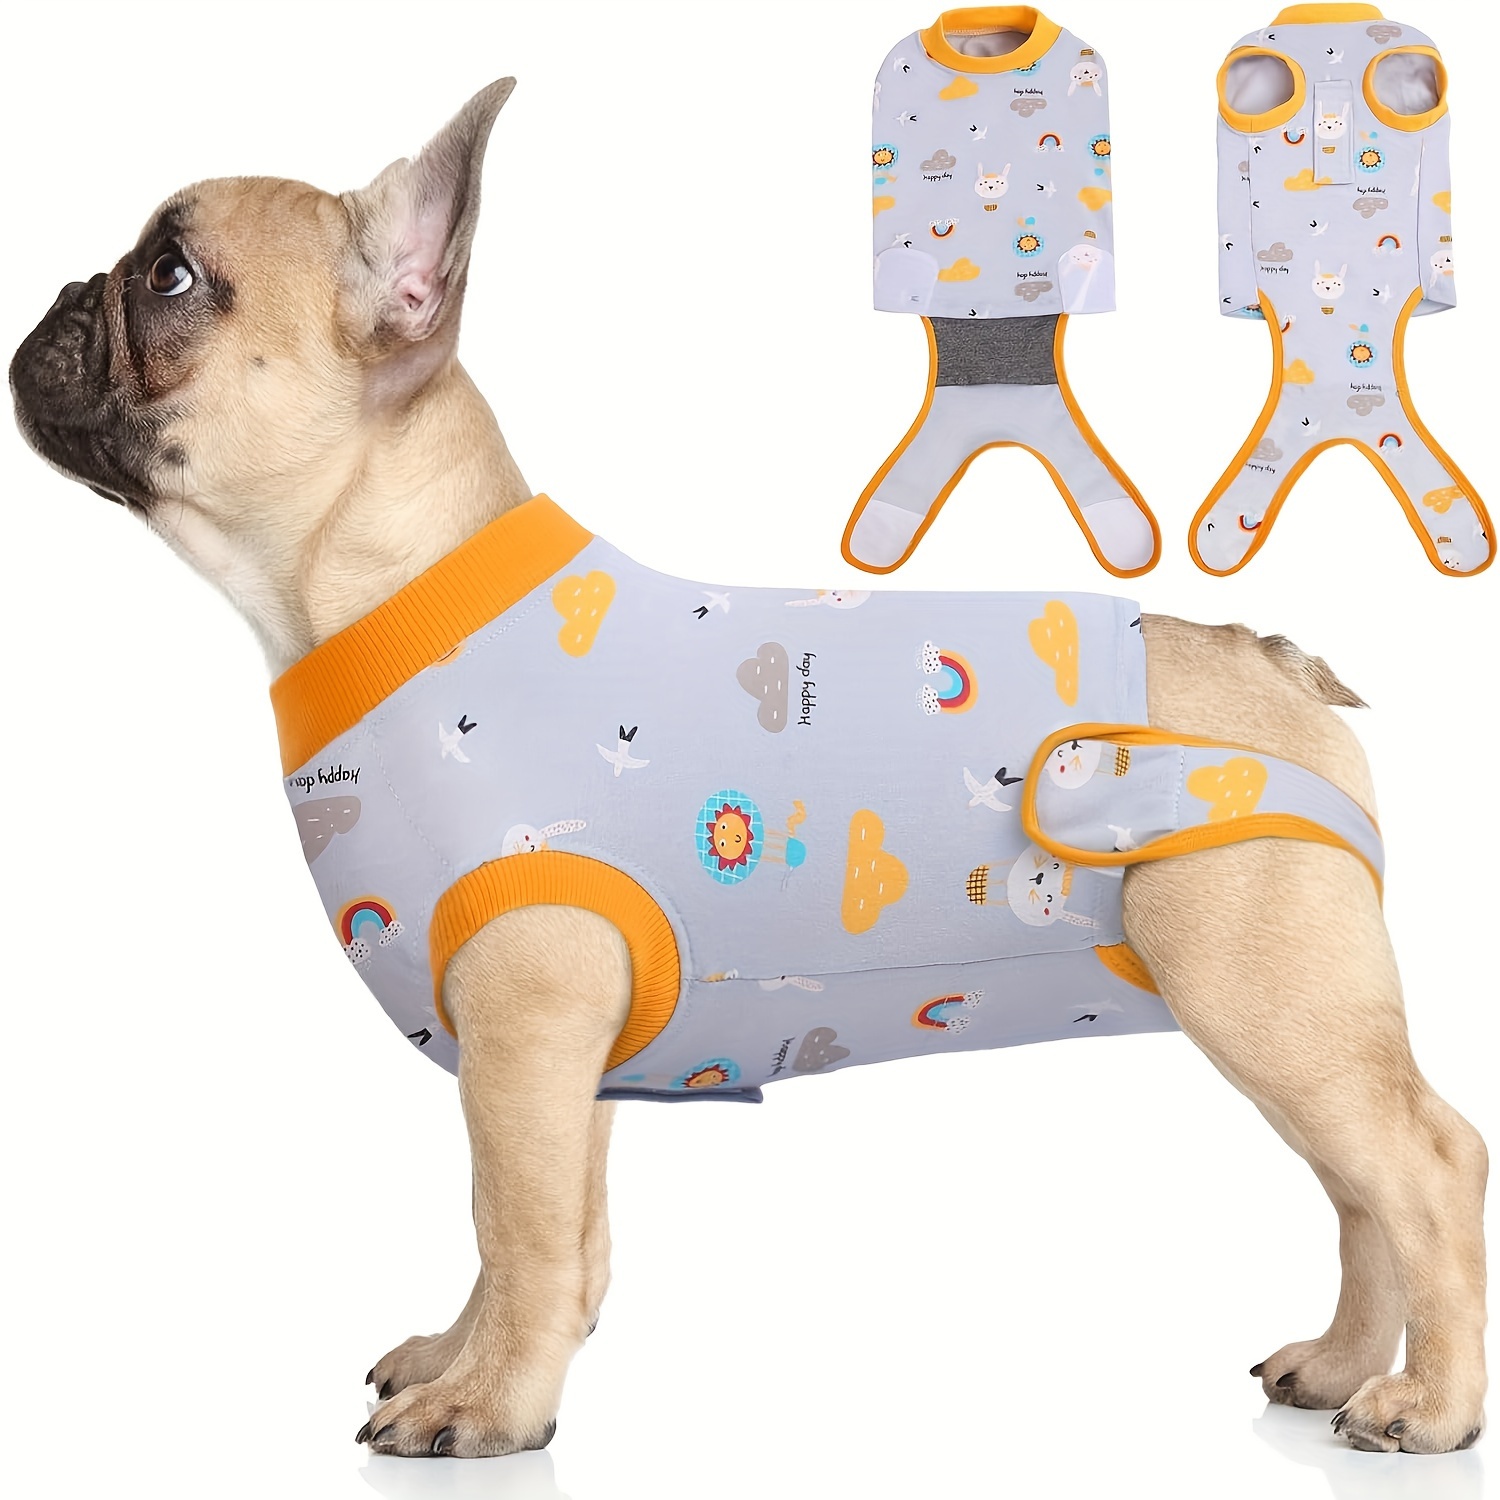 

Dog Recovery Suit After Surgery, Breathable Dog Surgery Recovery Suit For Female Male Dogs Cats, Dog Surgical Onesie For Spay Neuter Surgery, E-collar Cone Alternative Anti-licking Abdominal Wound